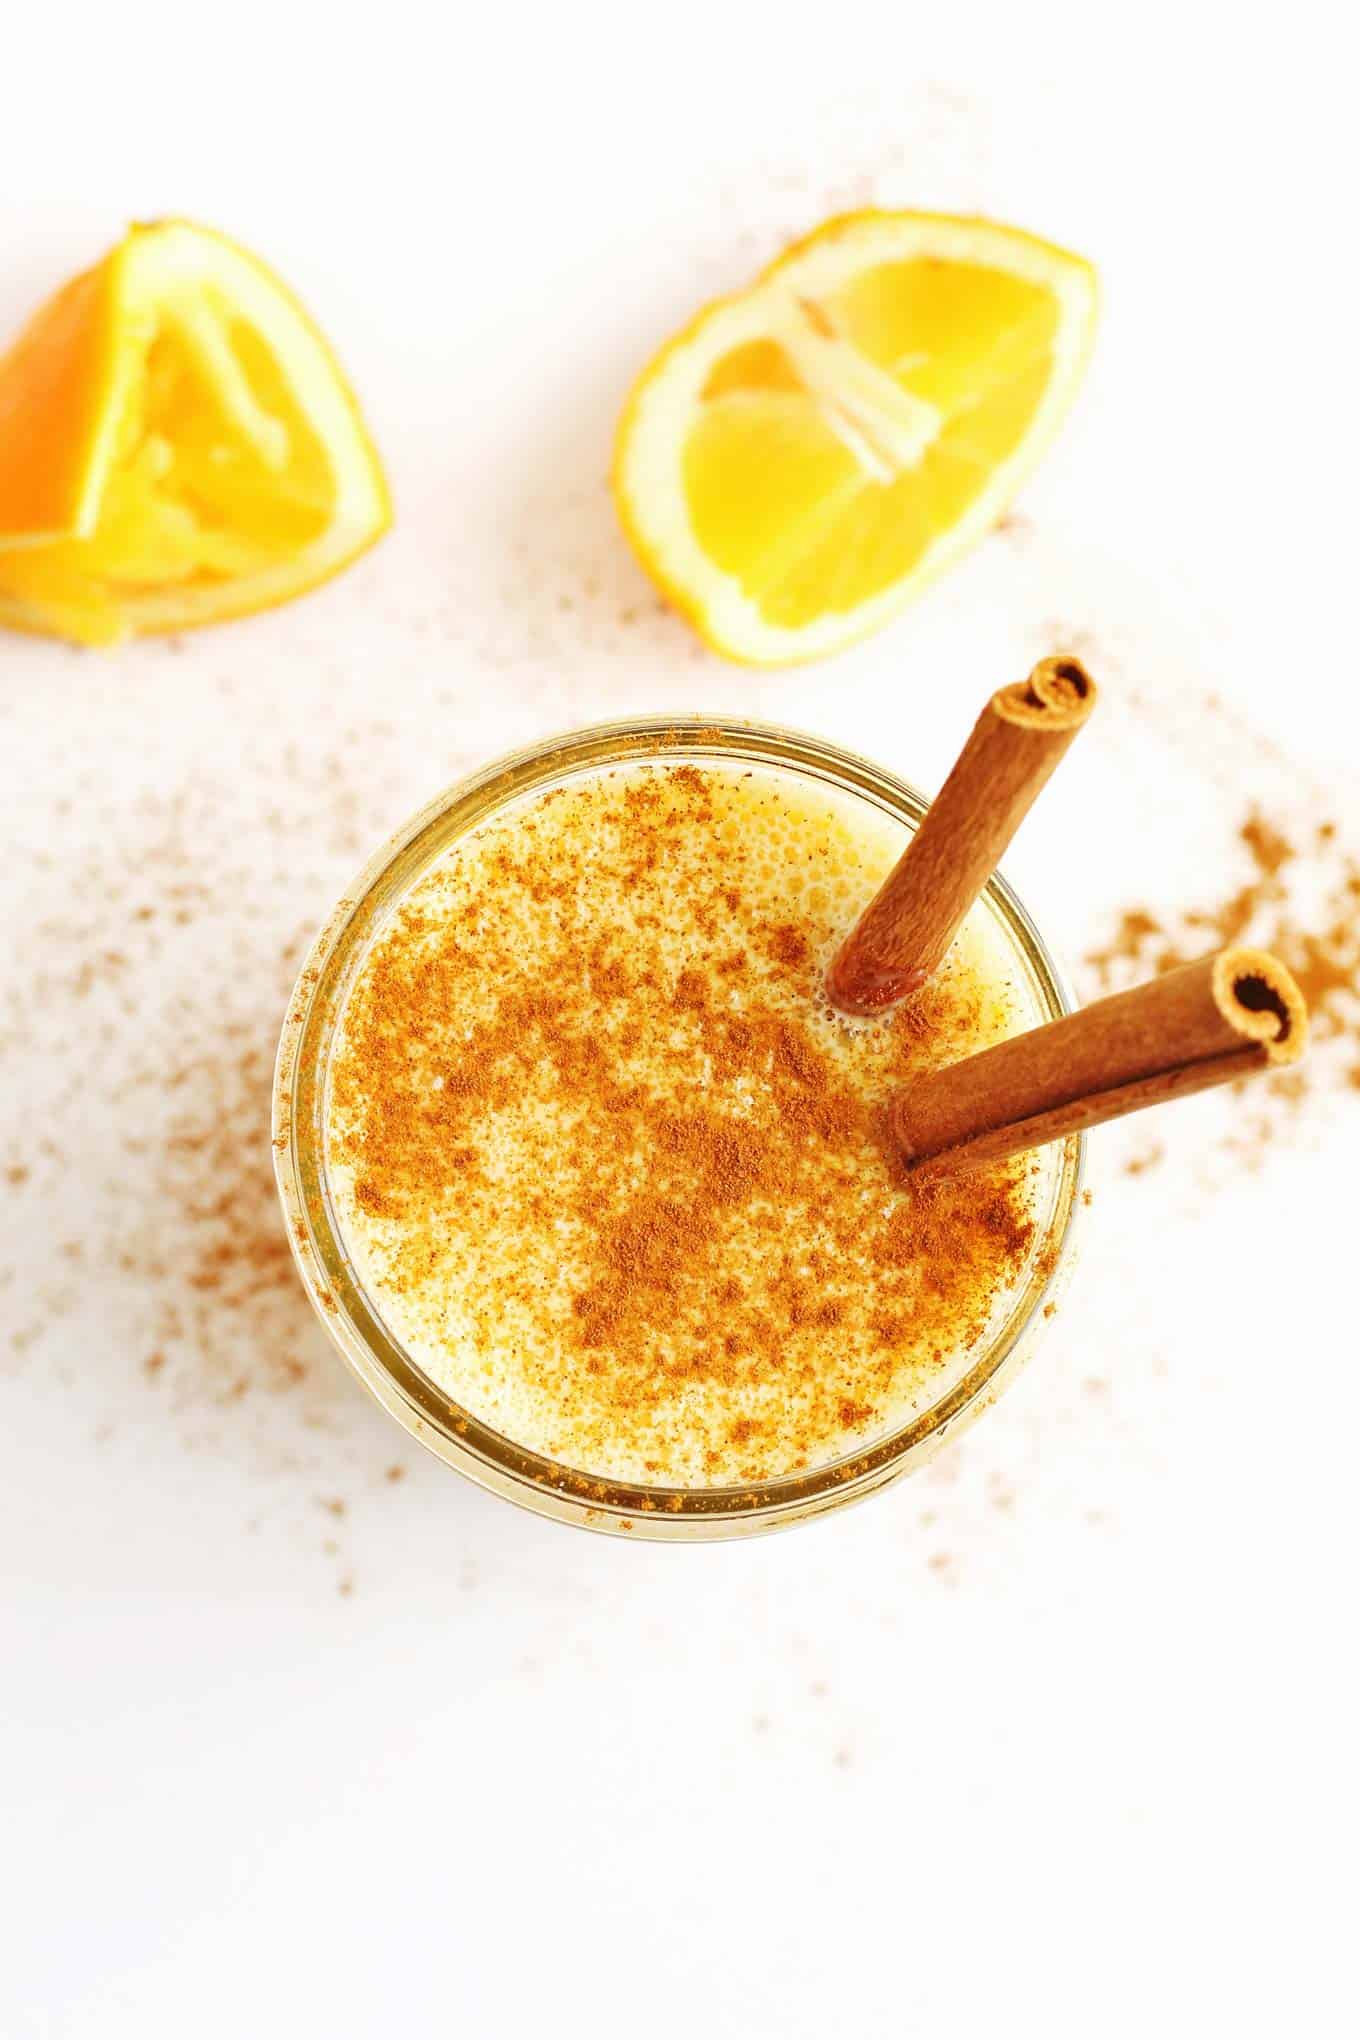 Sunshine yogurt orange smoothie with vanilla and cinnamon! Easy 4 ingredient recipe for a bright, refreshing, healthy smoothie. Perfect for breakfast or as a snack! - Rhubarbarians